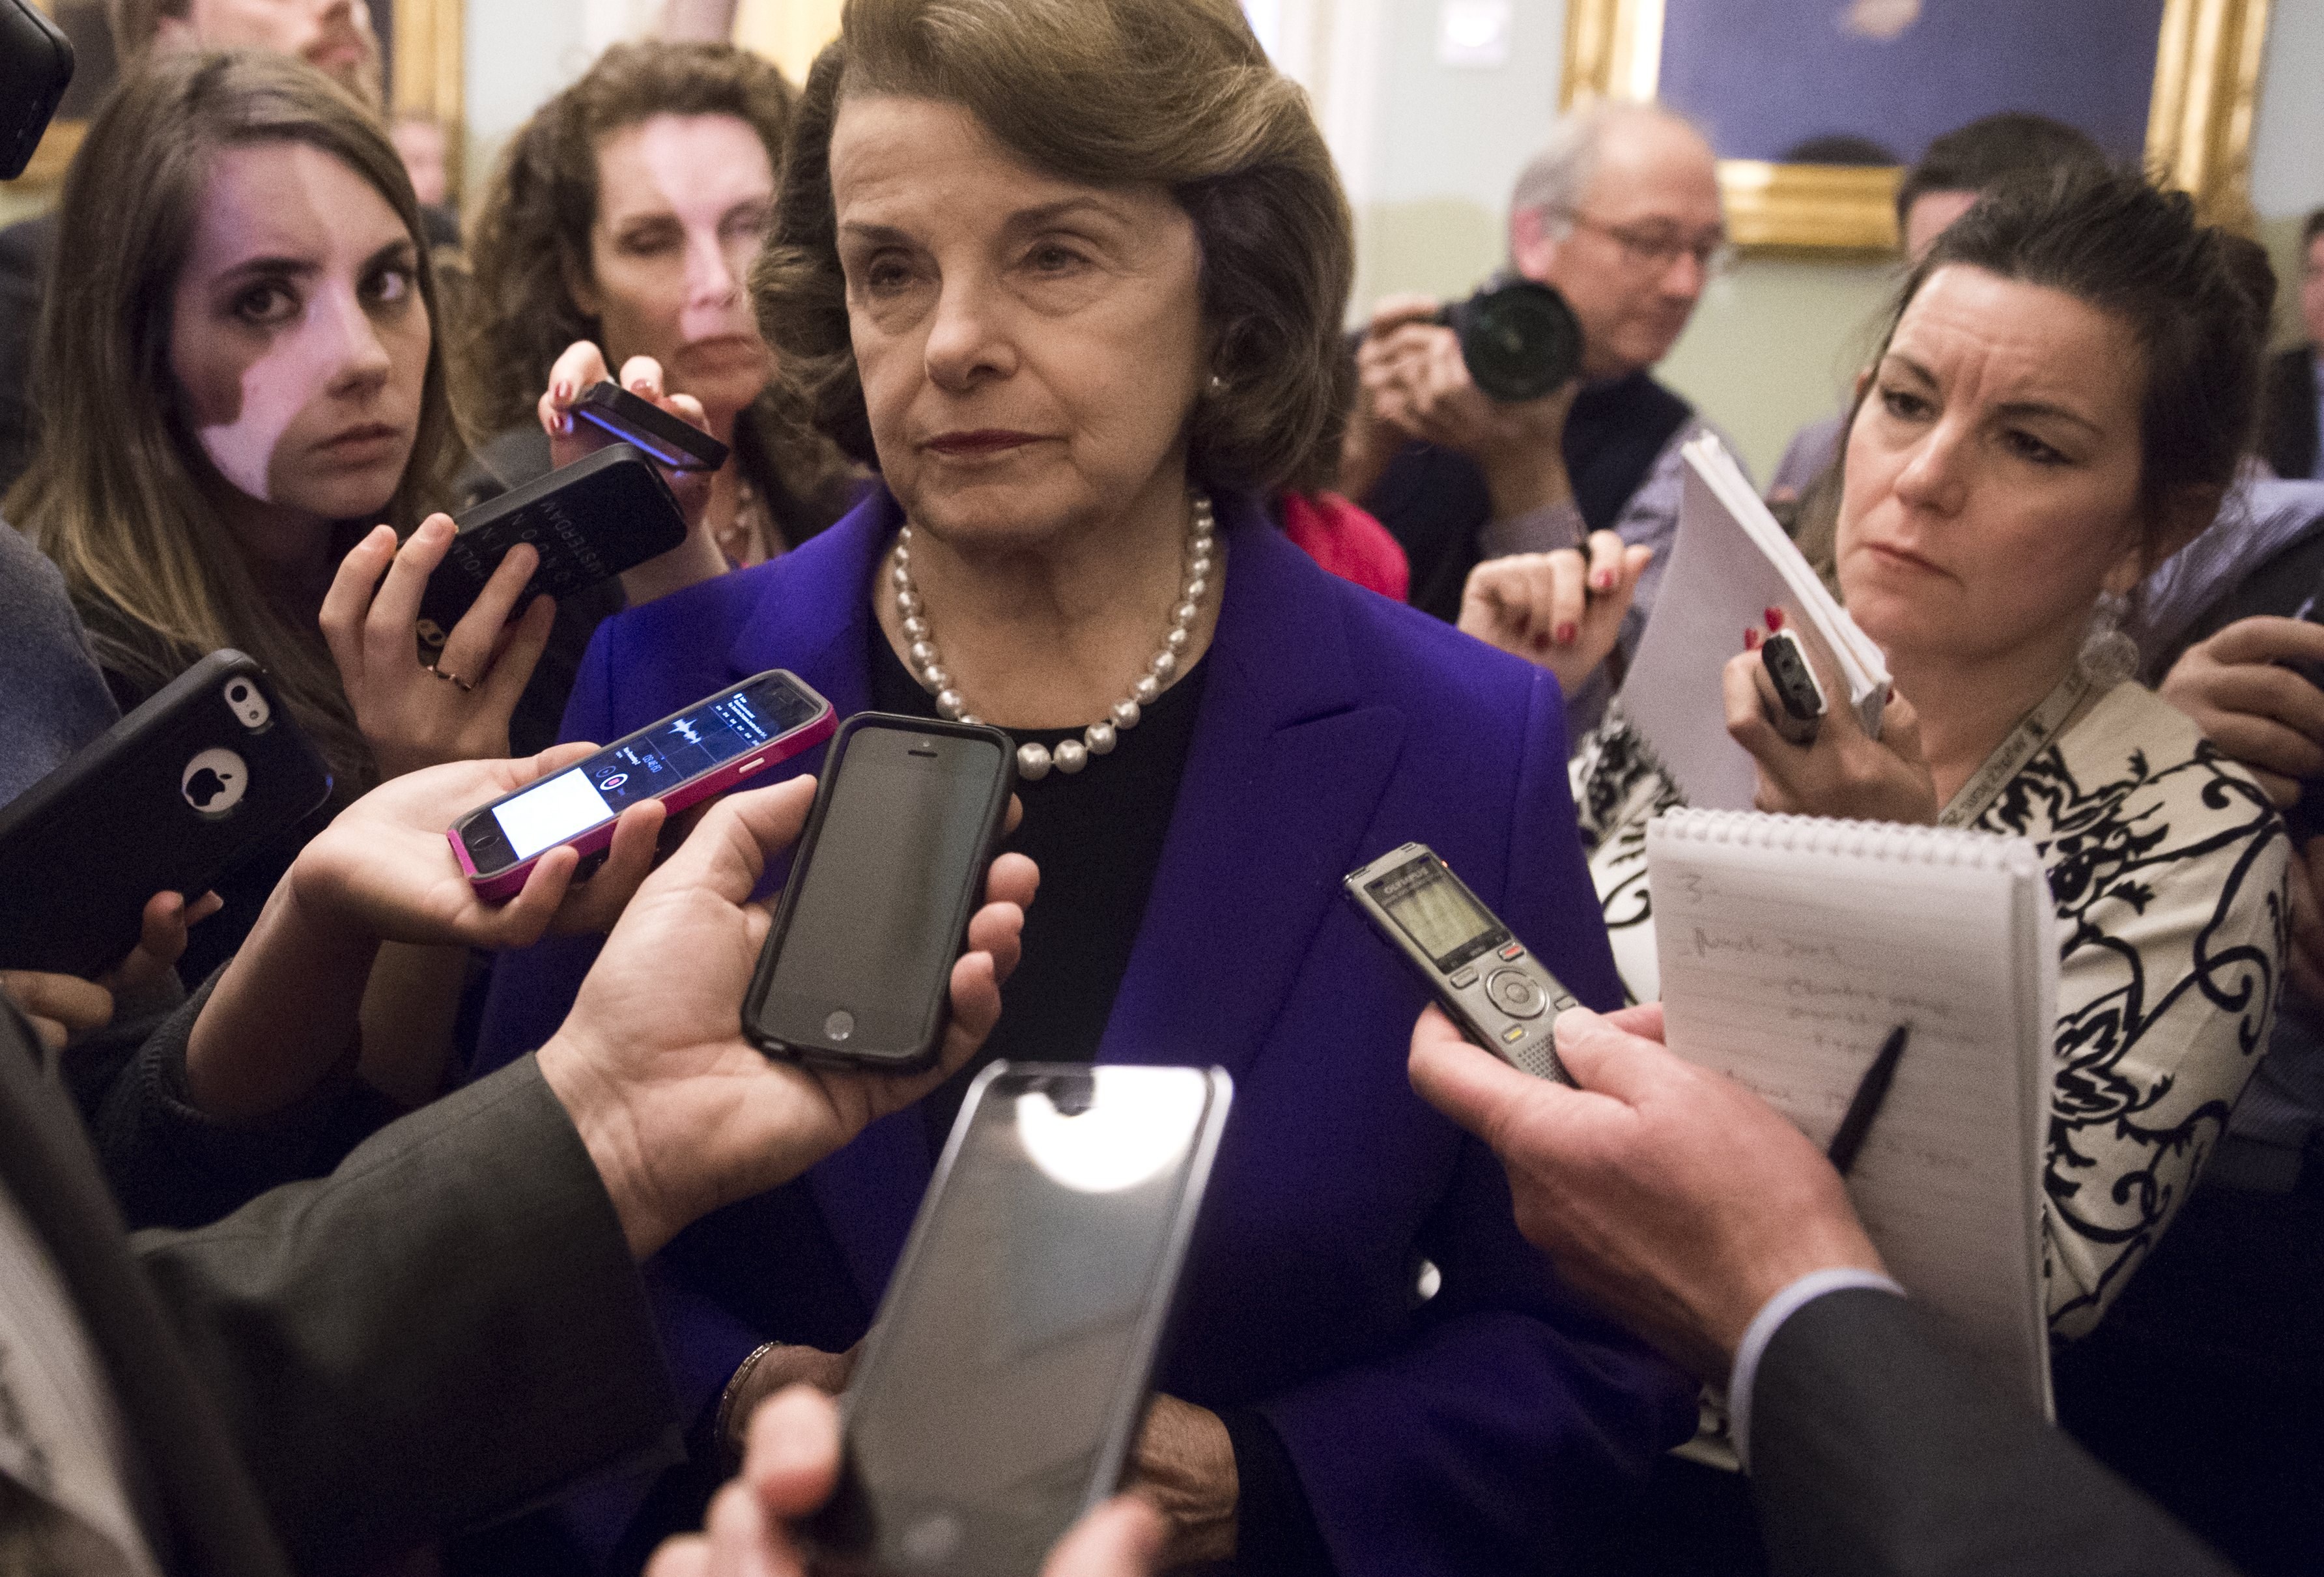 Senate Intelligence Chairwoman Dianne Feinstein (C), a Democrat from California, speaks to reporters about the committee's report on CIA interrogations at the US Capitol in Washington, DC, December 9, 2014.  The CIA's interrogation of Al-Qaeda suspects was far more brutal than acknowledged and did not produce useful intelligence, a damning and long-delayed US Senate report said Tuesday. The Central Intelligence Agency also misled the White House and Congress with inaccurate claims about the program's usefulness in thwarting attacks, the Senate Intelligence Committee said. AFP PHOTO / SAUL LOEB        (Photo credit should read SAUL LOEB/AFP/Getty Images)